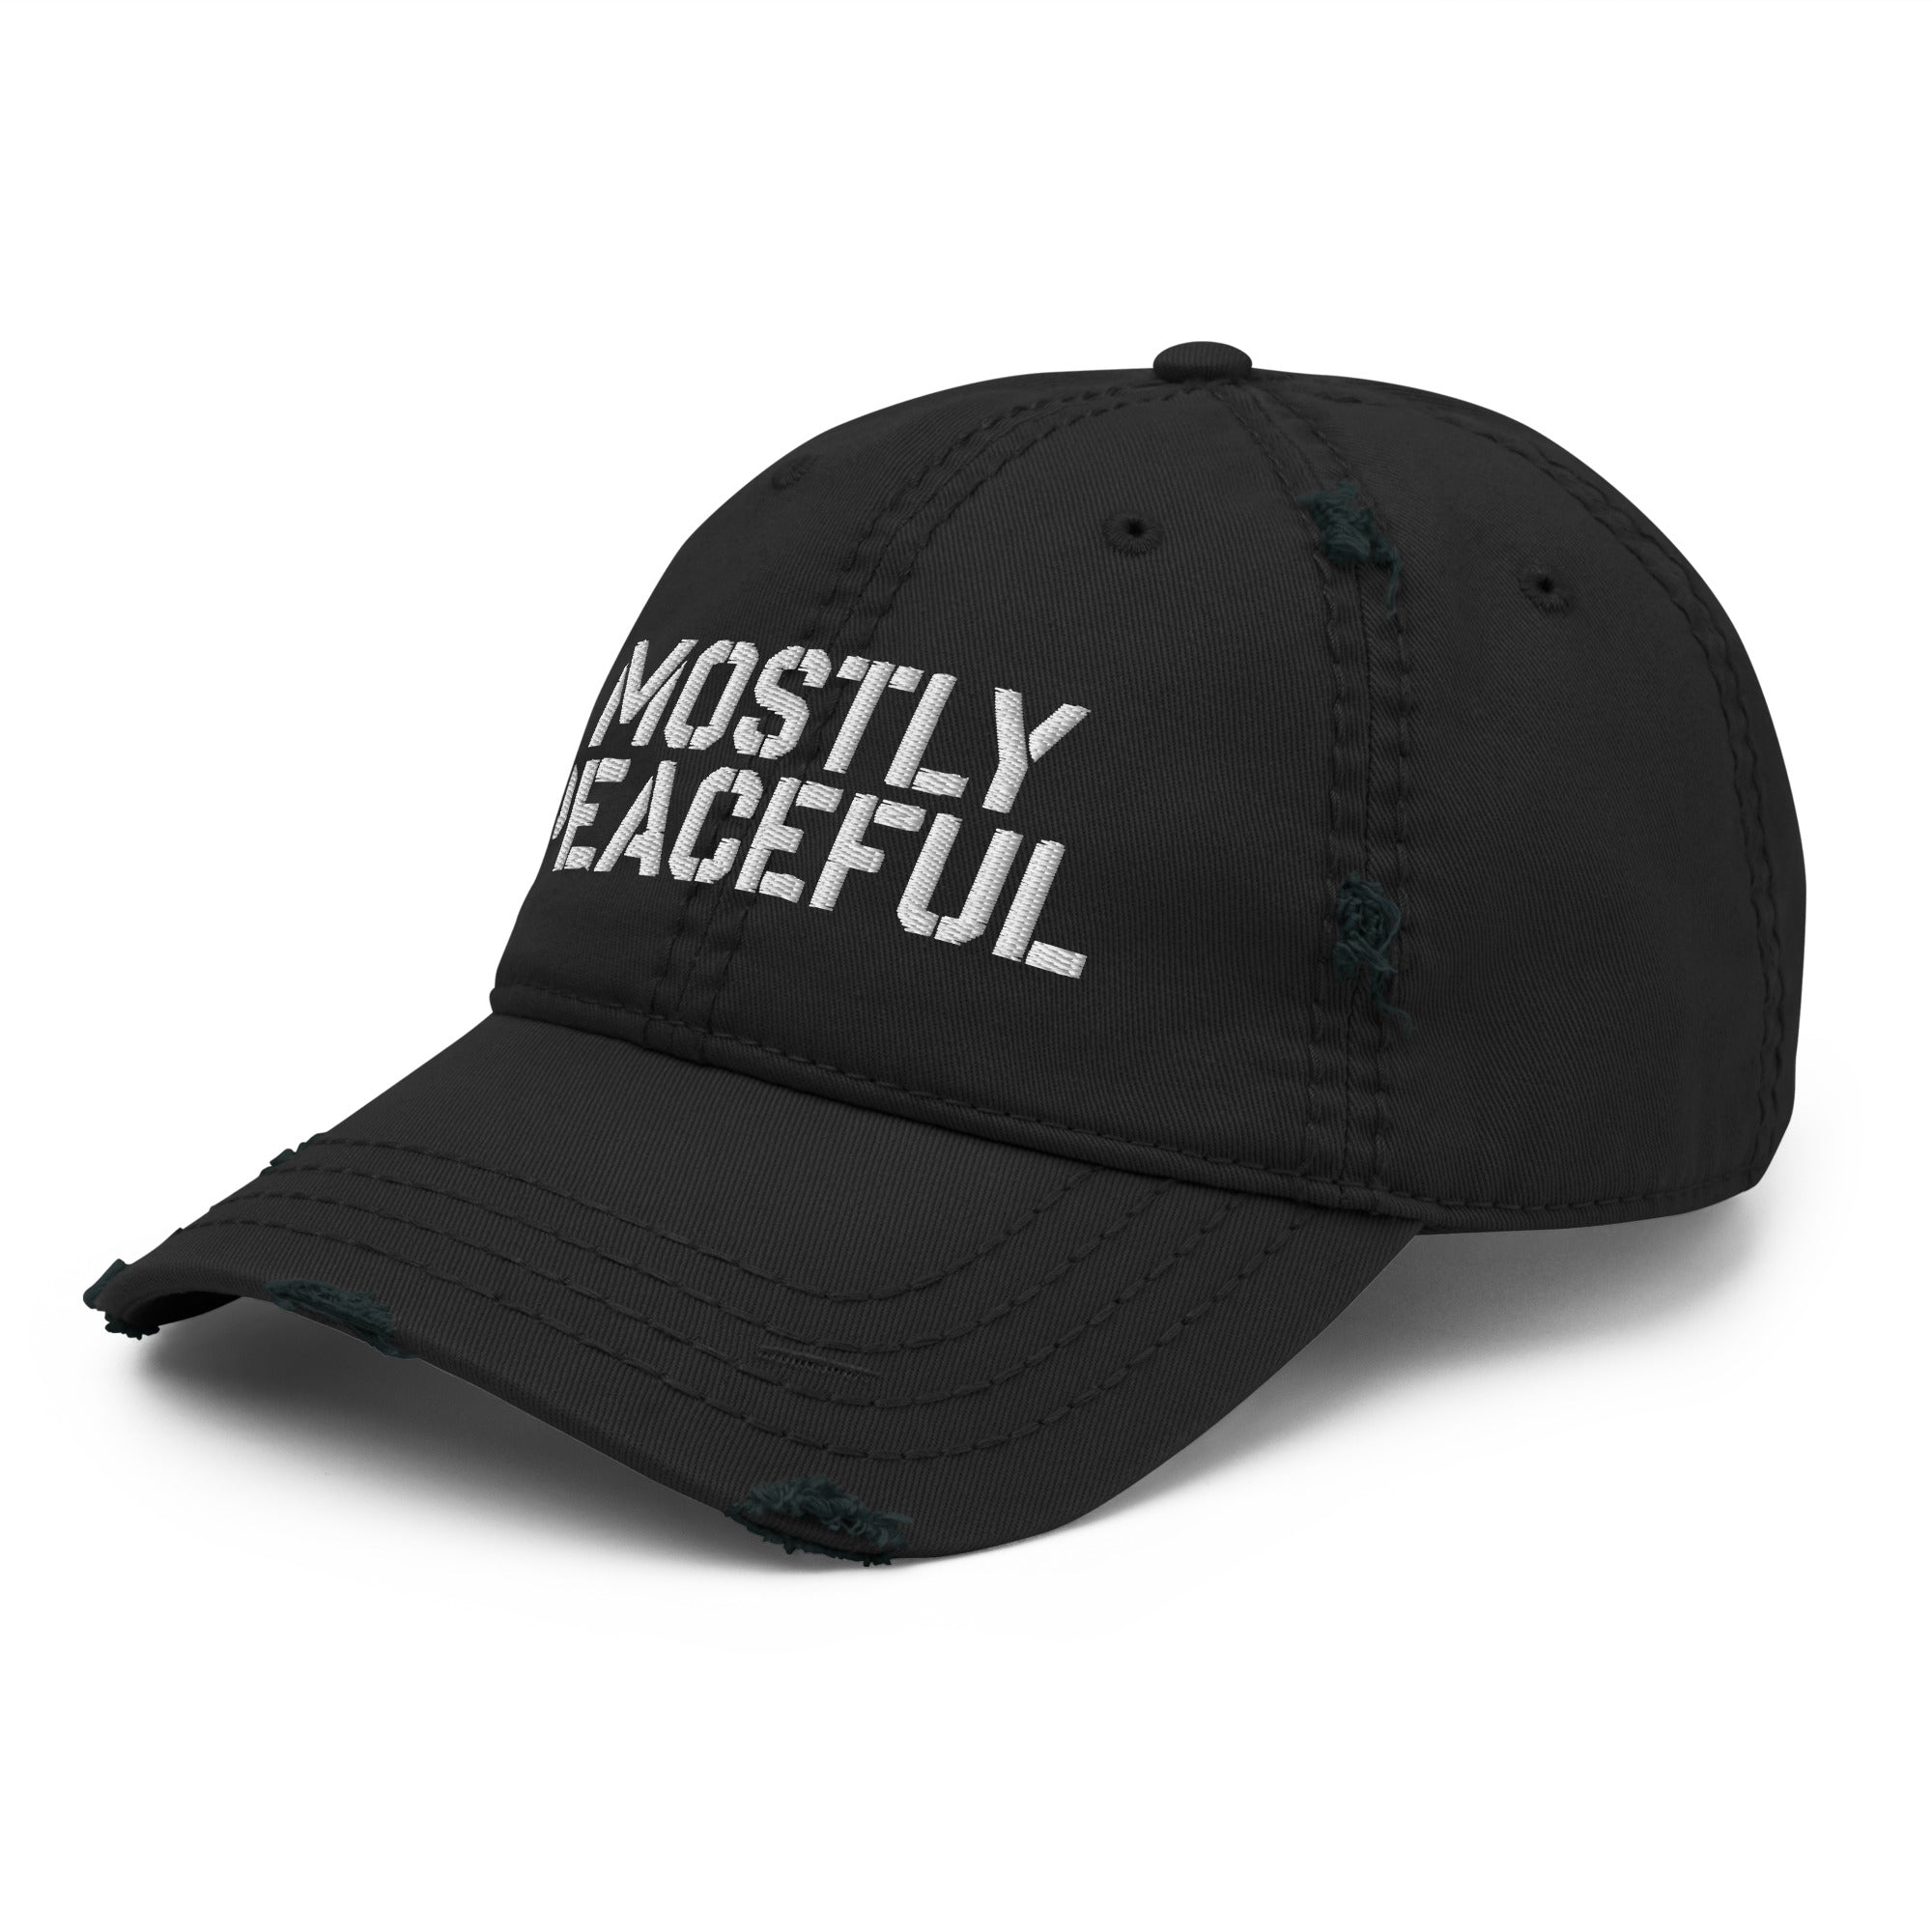 Mostly Peaceful Distressed Hat